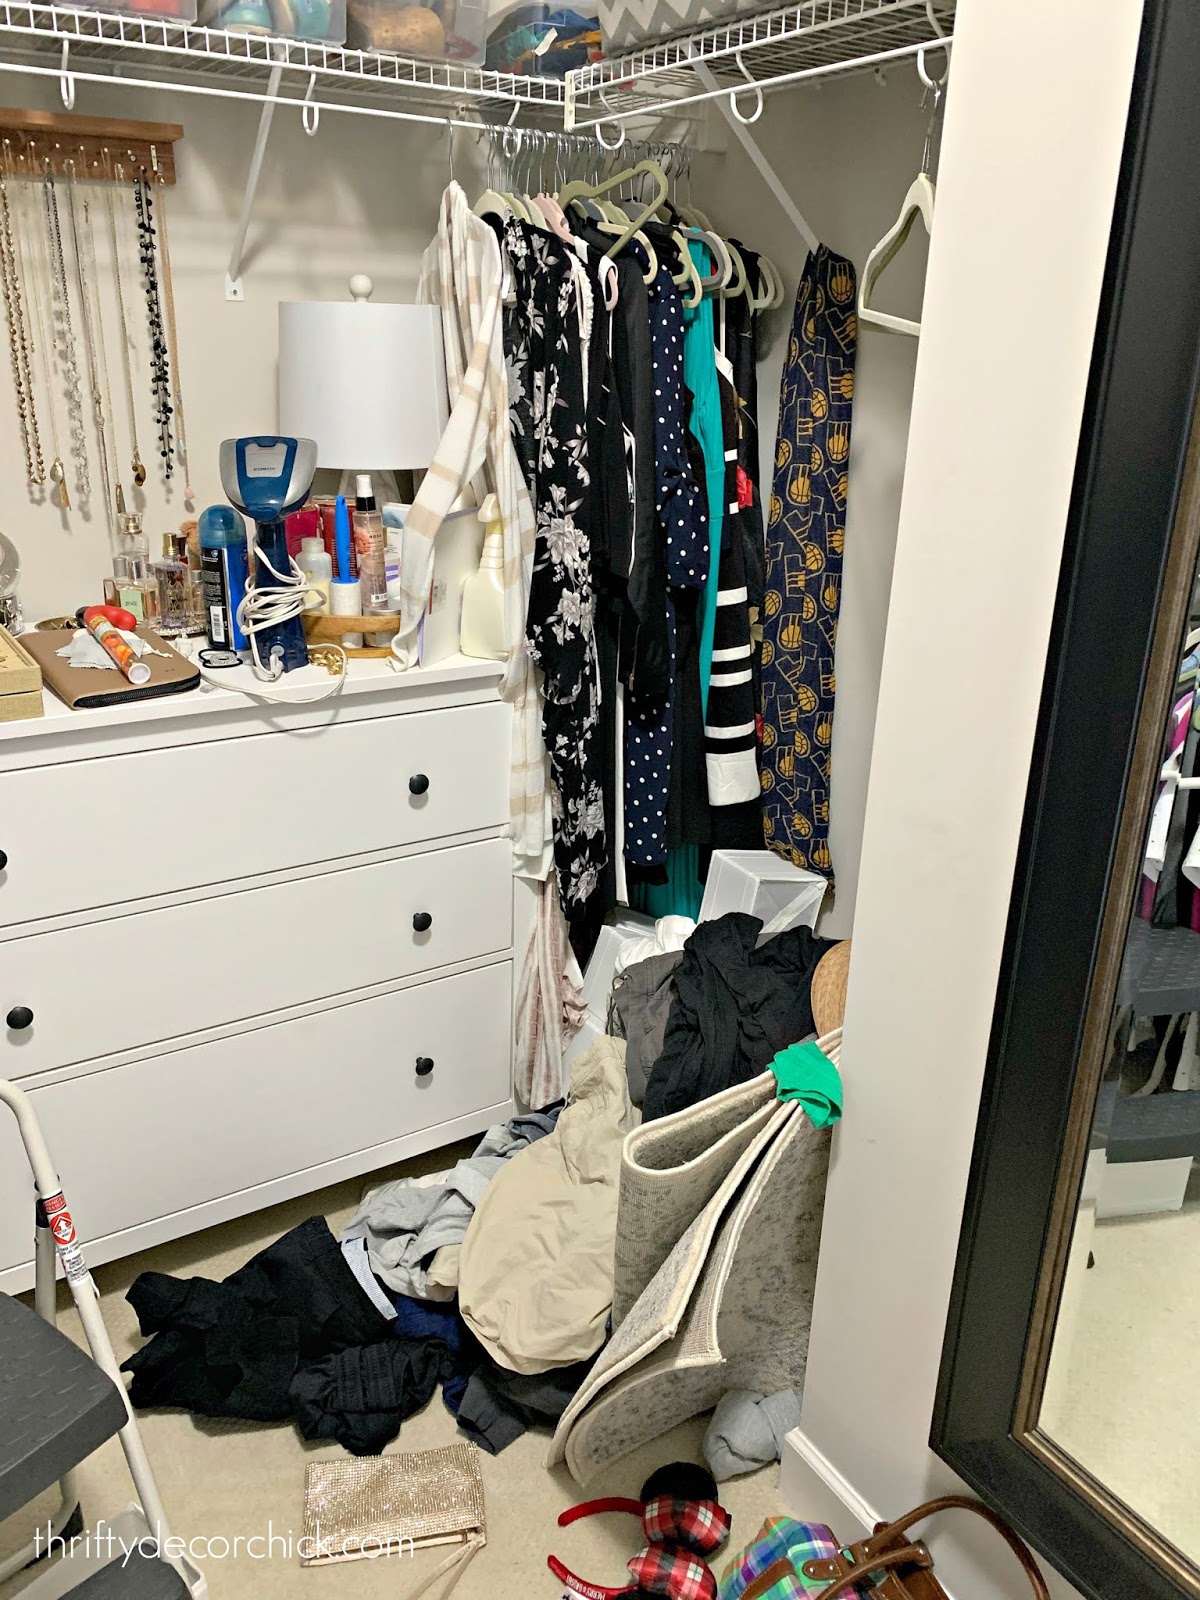 Replacing wire shelves in the closet